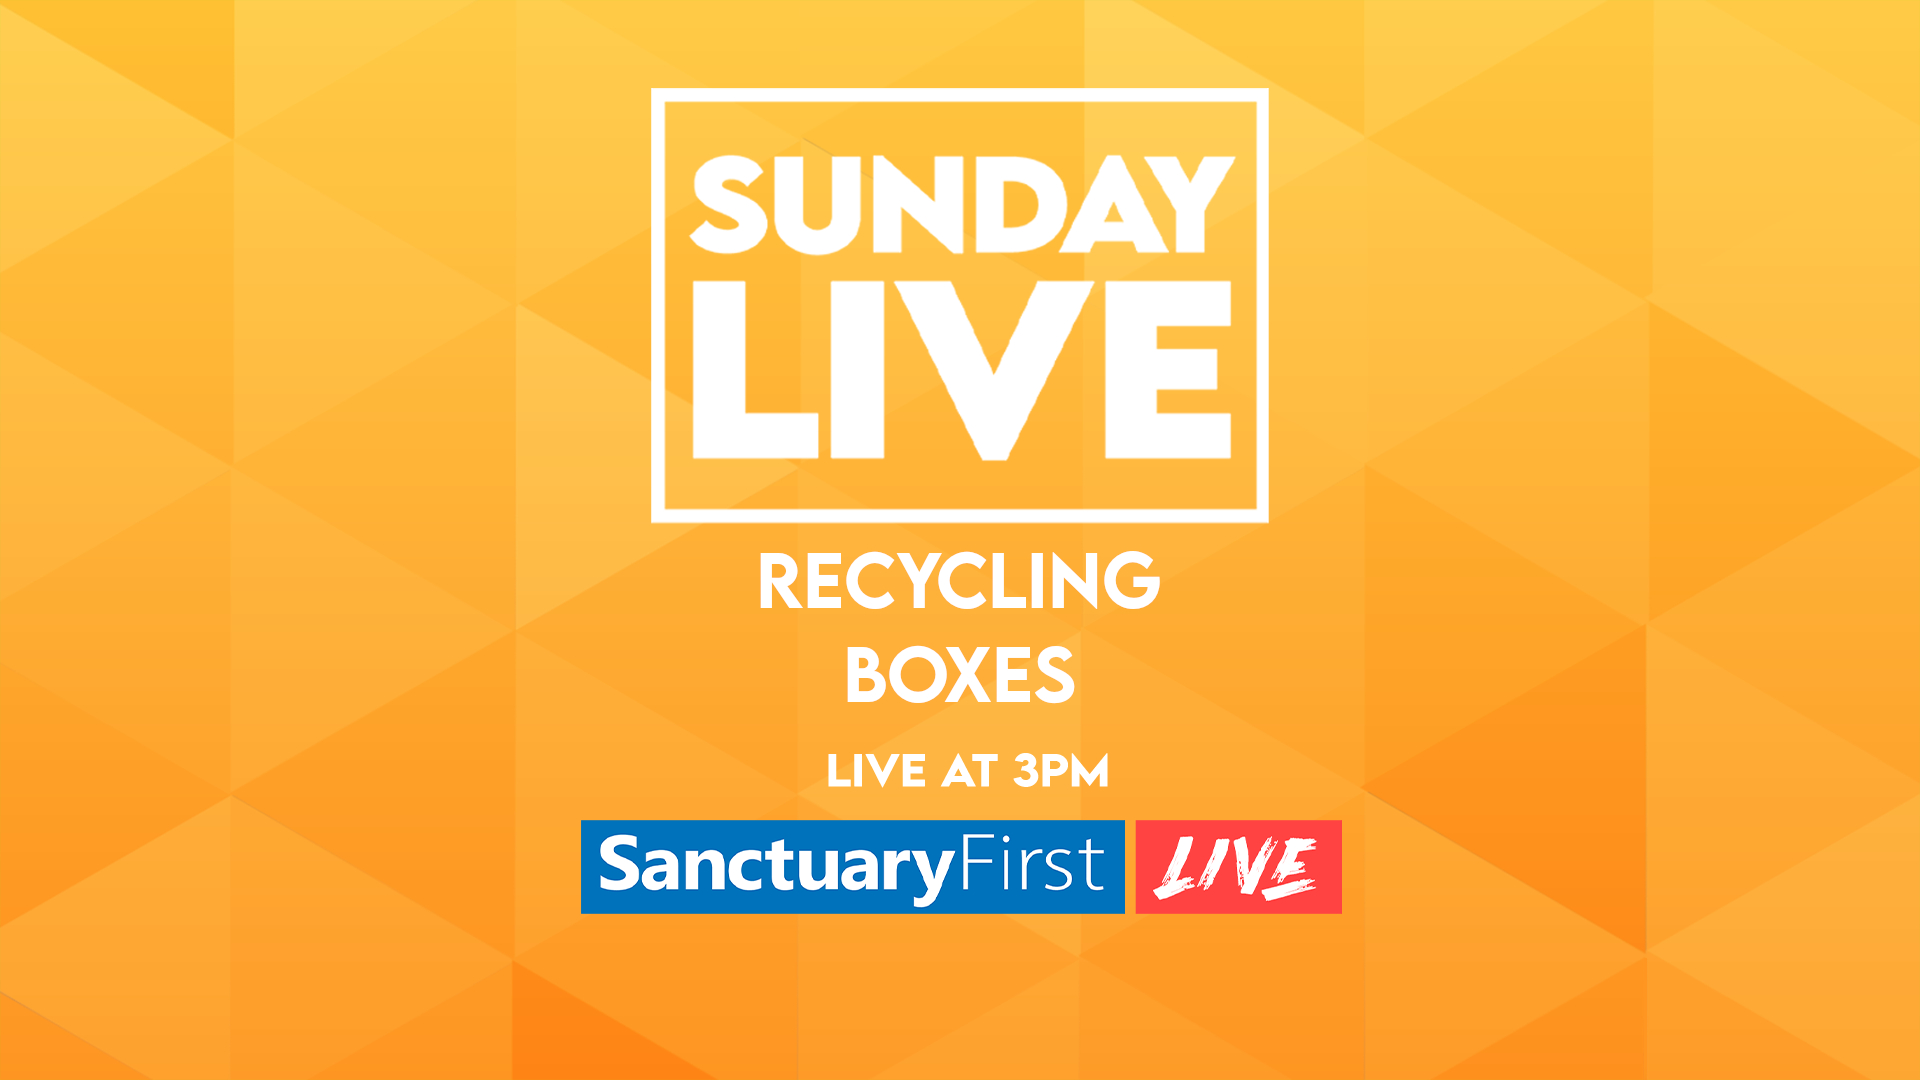 Sunday Live - Recycling Boxes